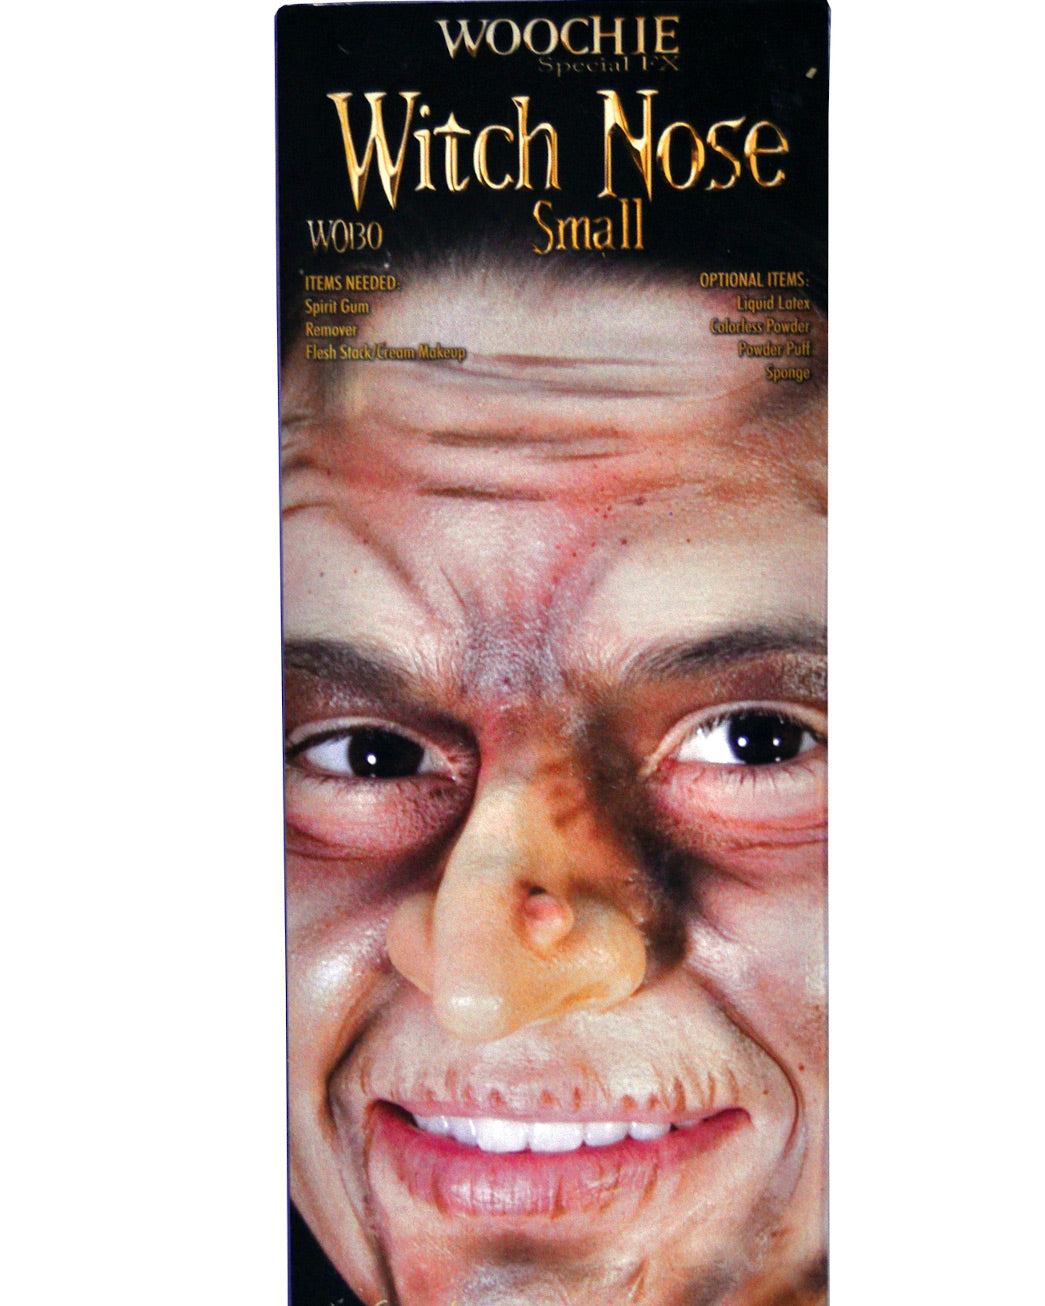 Woochie Witch Nose Small